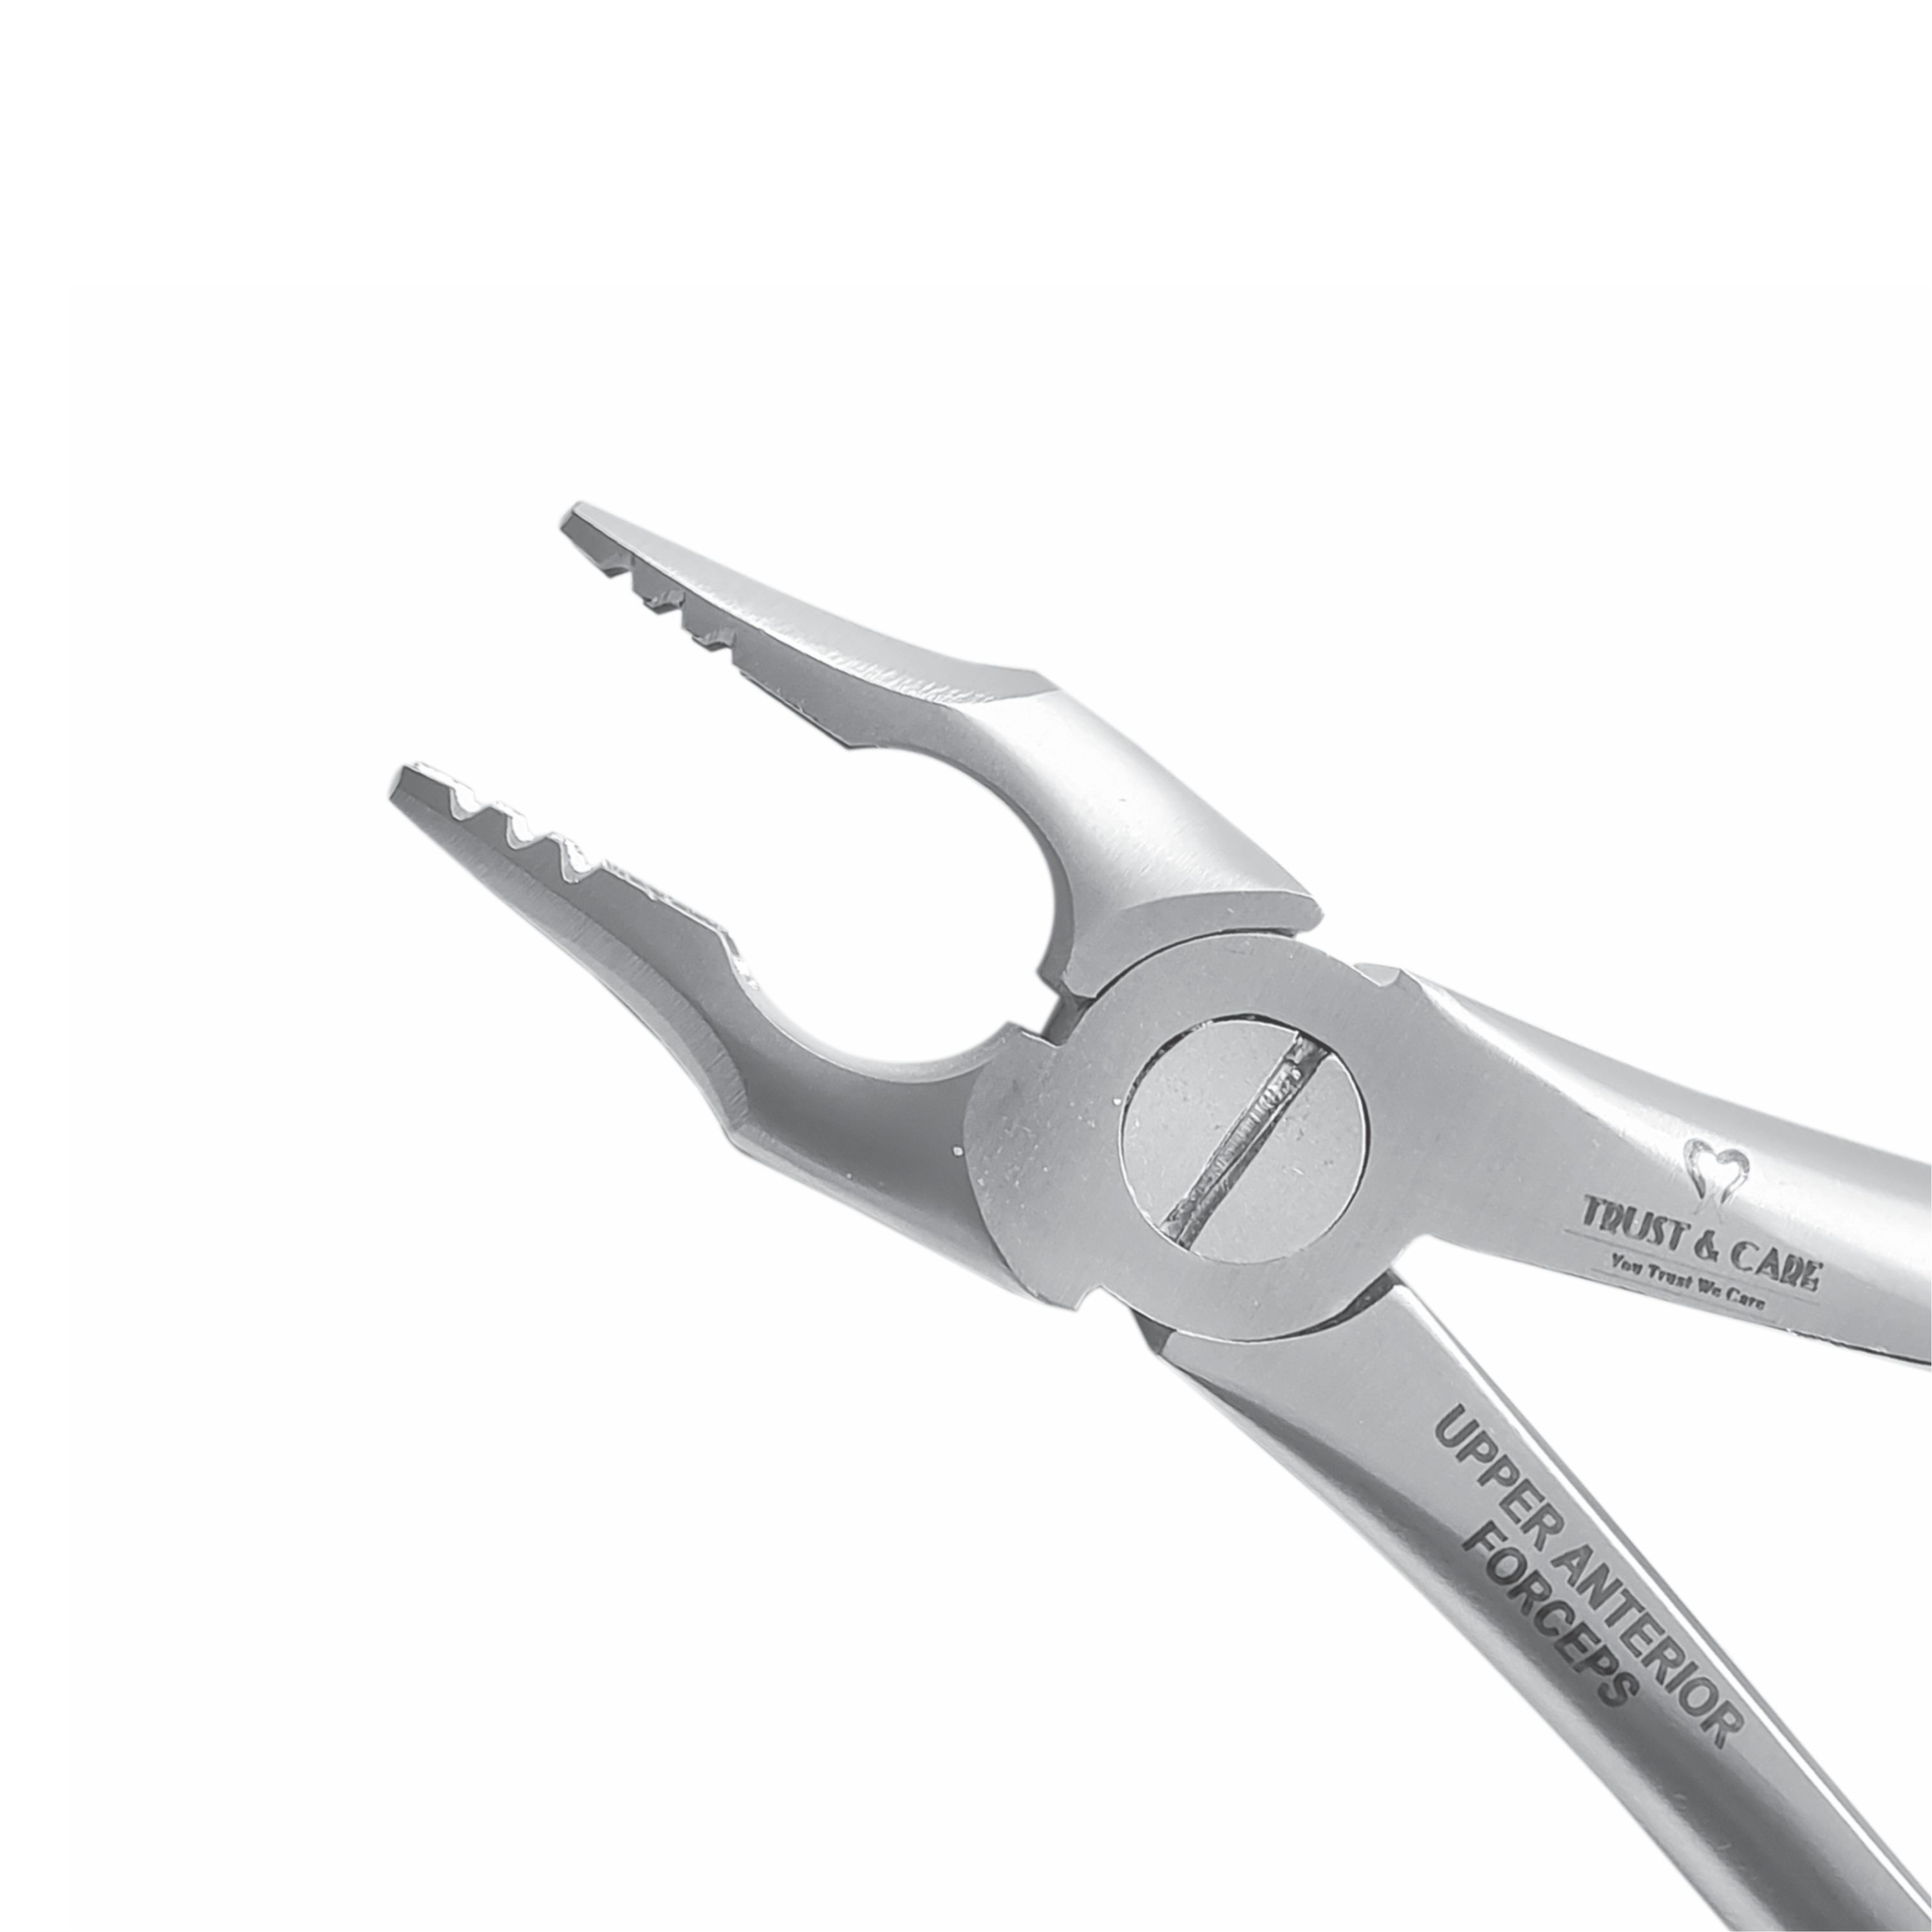 Trust & Care Deep Grip Extraction Forcep Upper Anterior